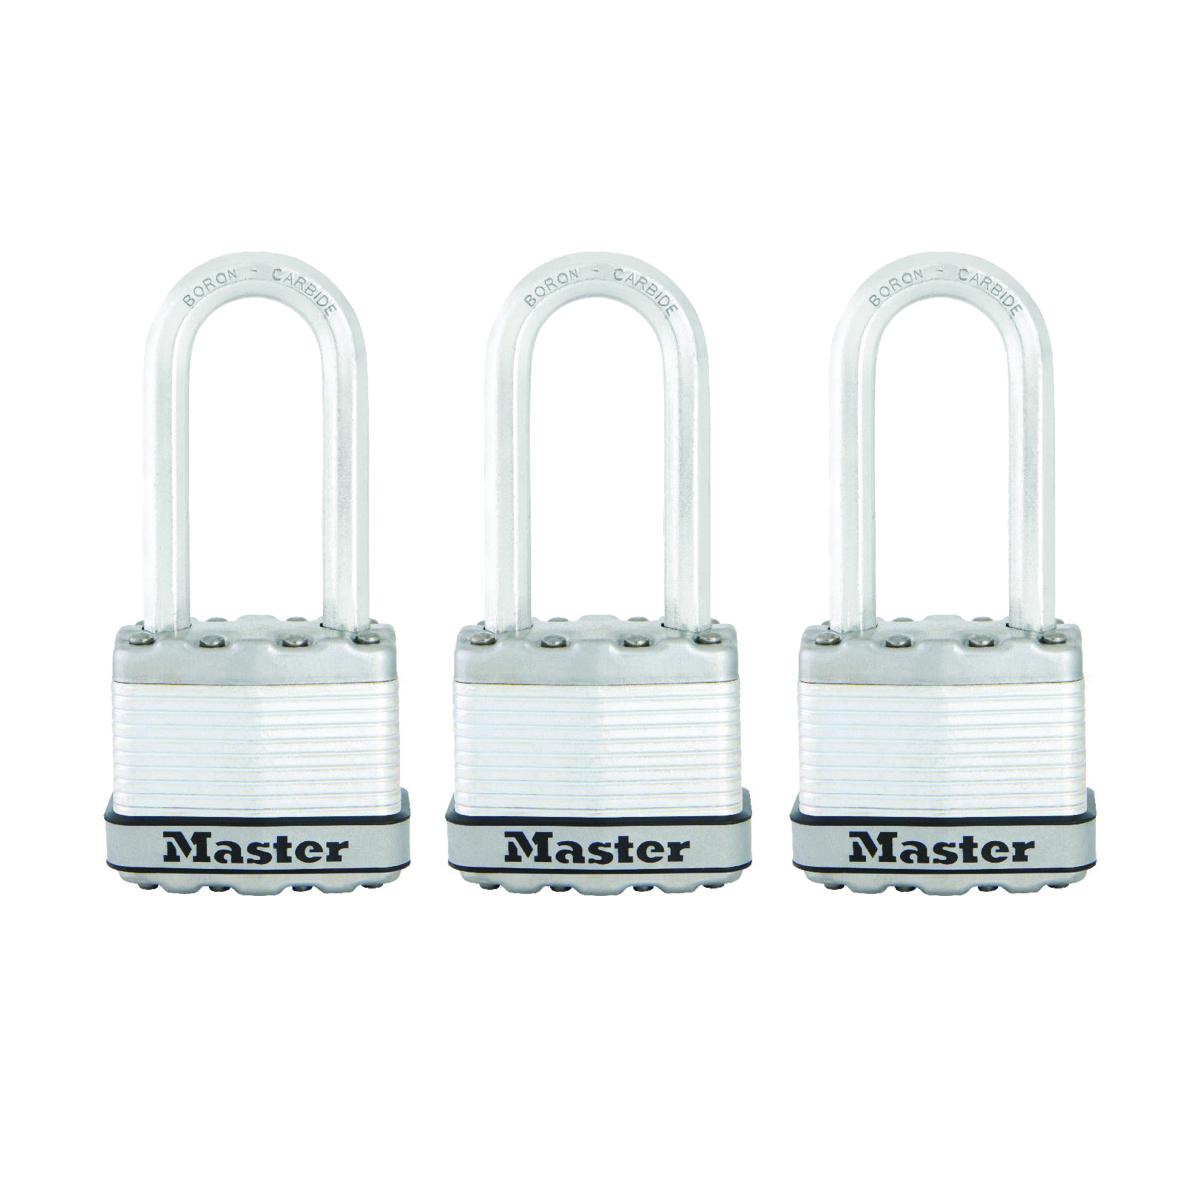 Magnum Series M1XTRILH Padlock, Keyed Alike Key, 5/16 in Dia Shackle, 2 in H Shackle, Stainless Steel Body